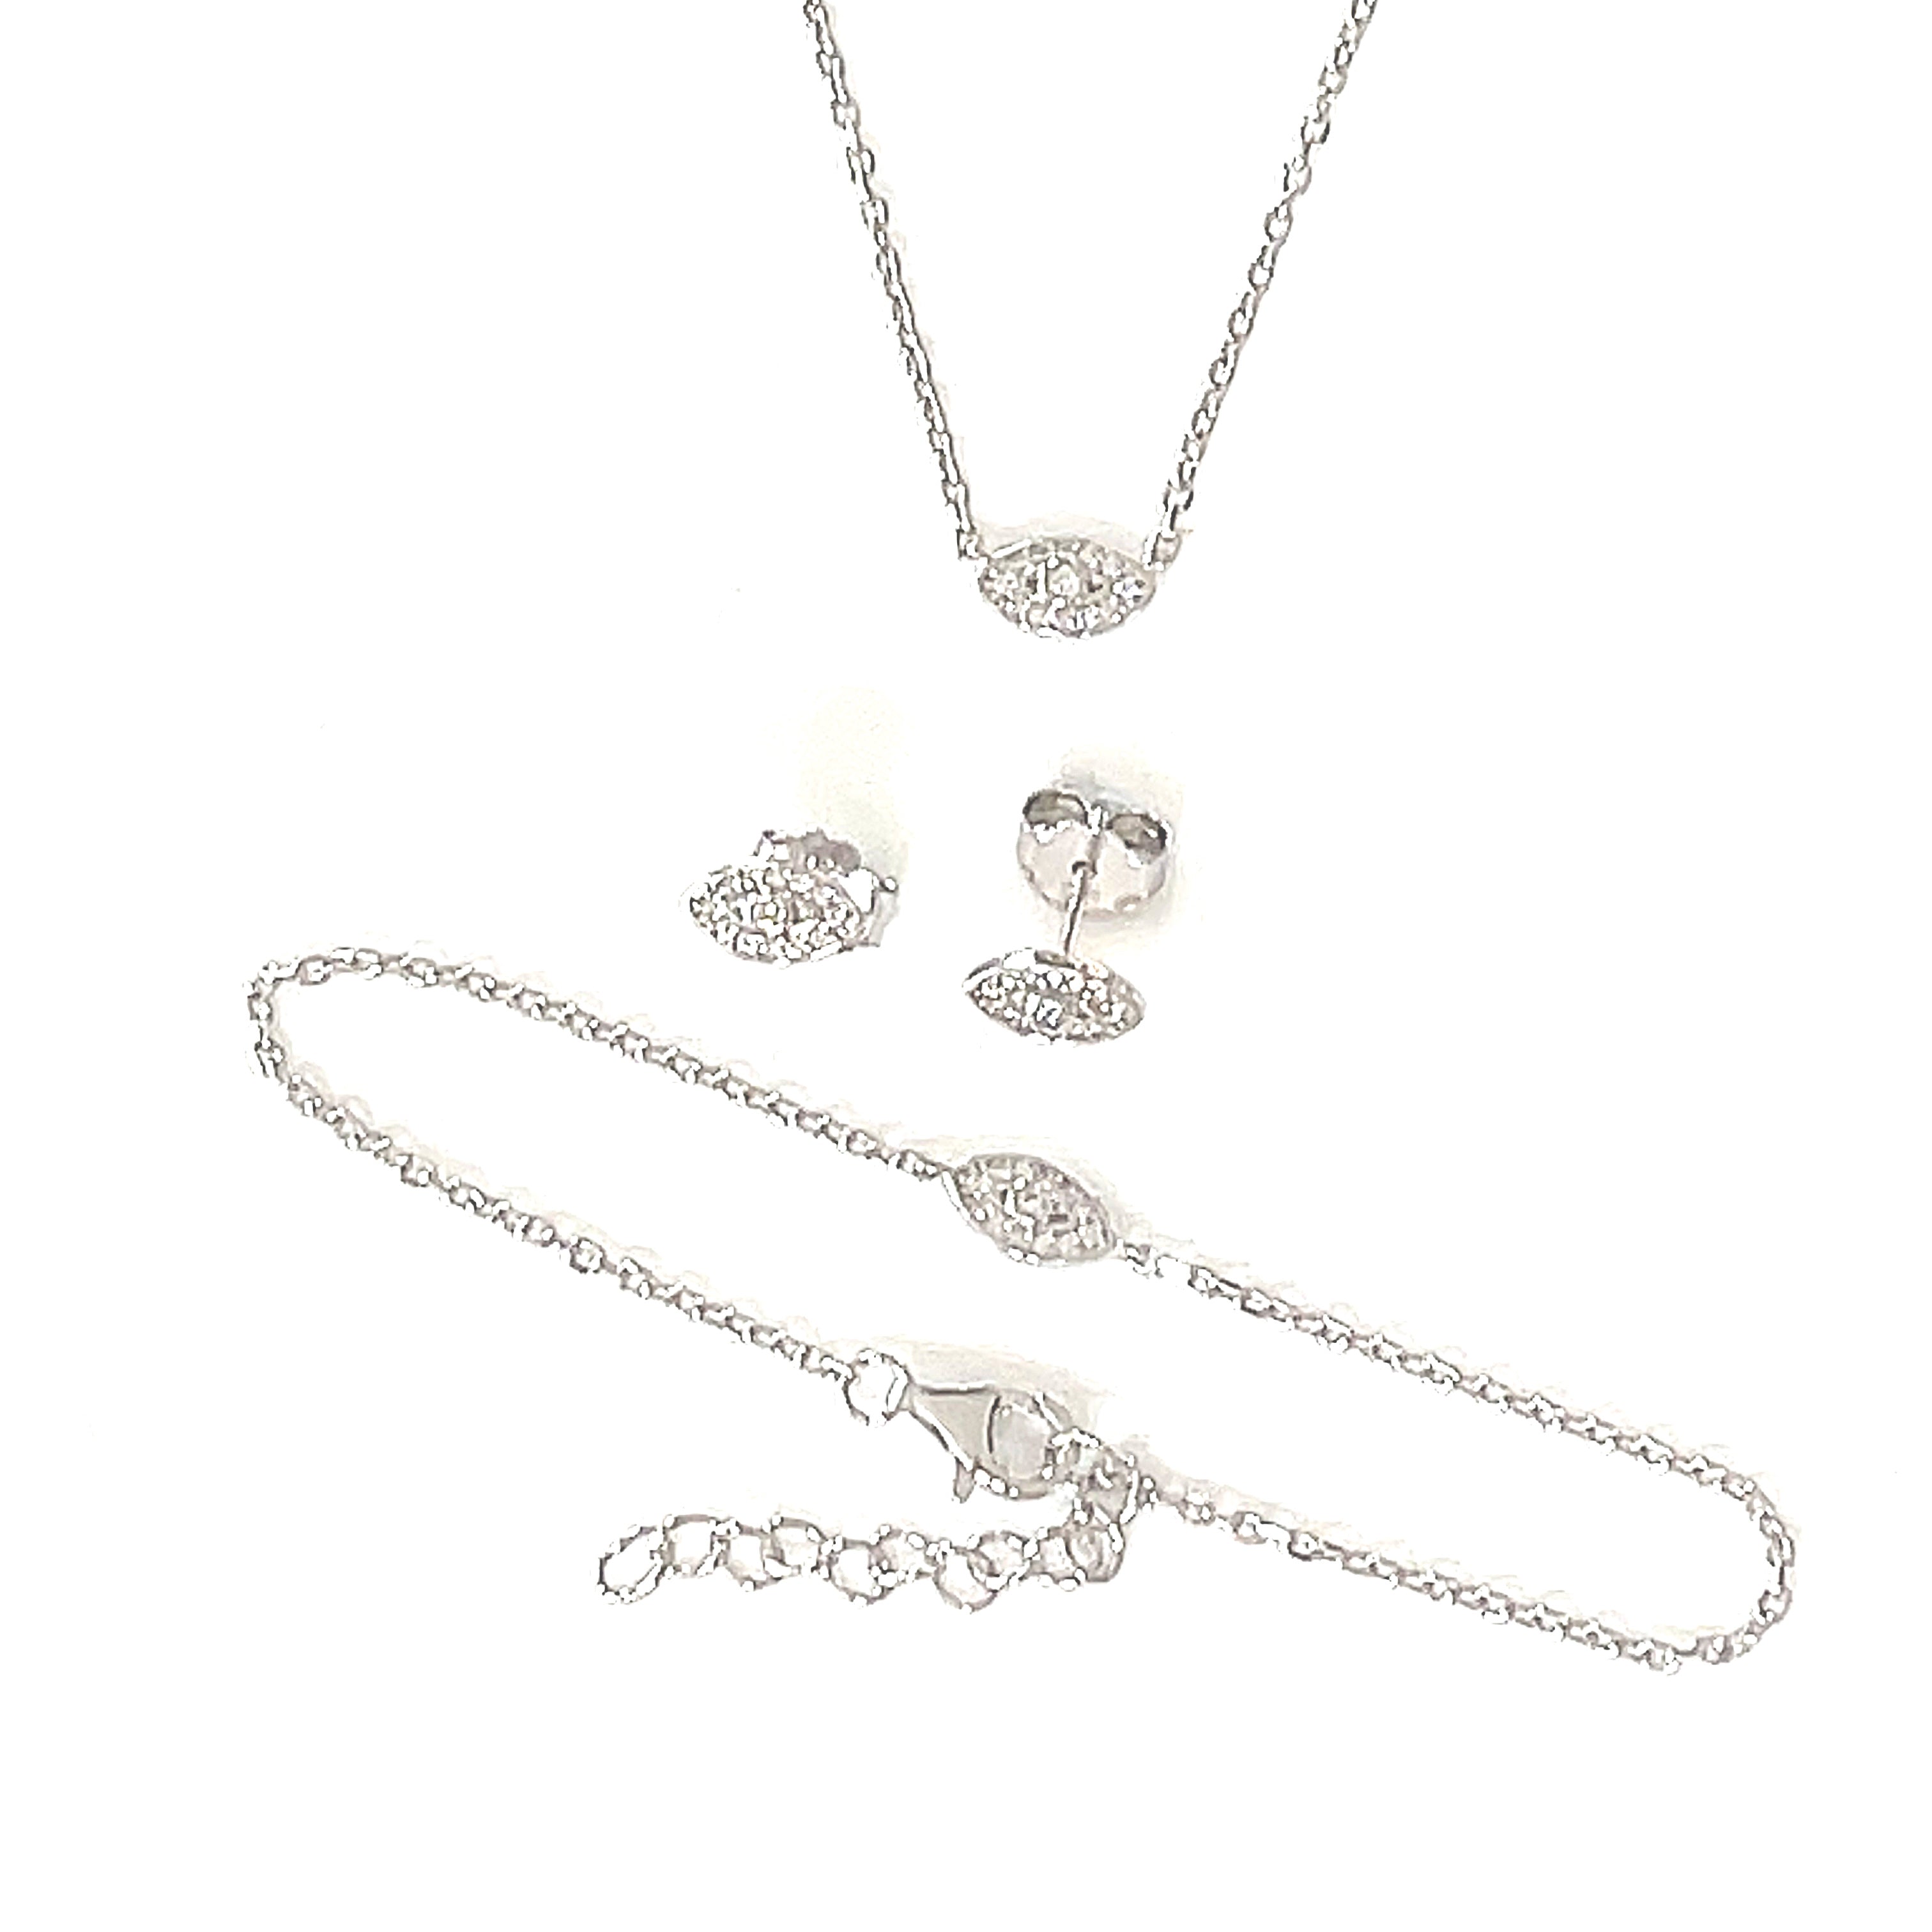 Pearl Necklace and Earrings Set on 925 Sterling Silver – The Proper Pearl